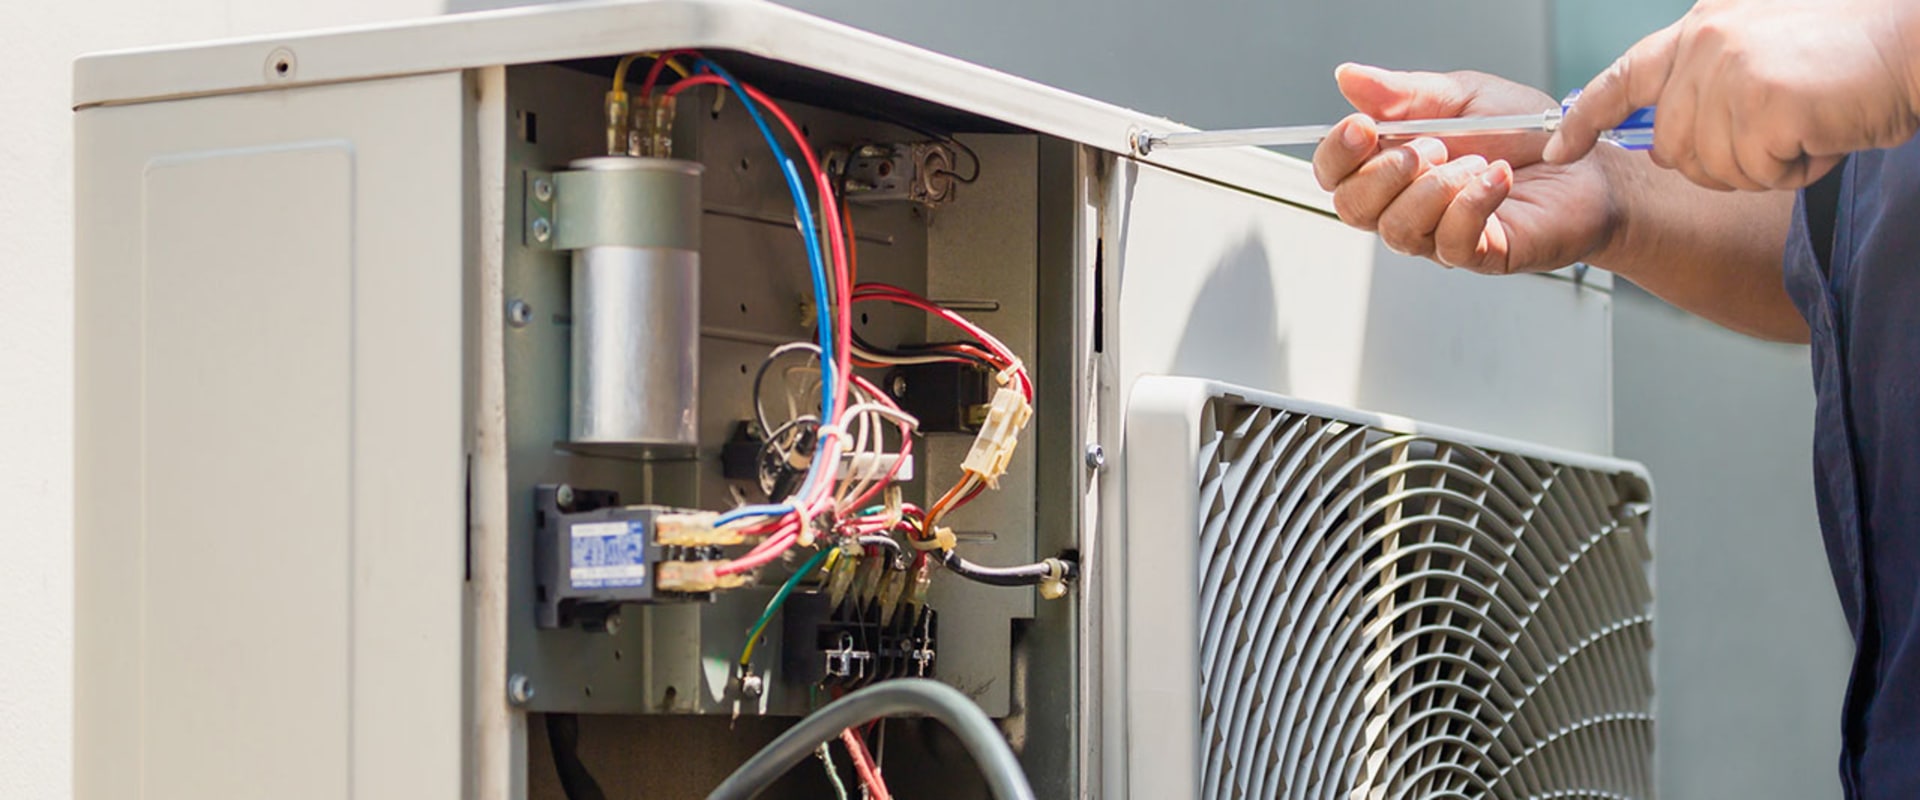 How Much Does it Cost to Repair a Freon Leak in an AC Unit?